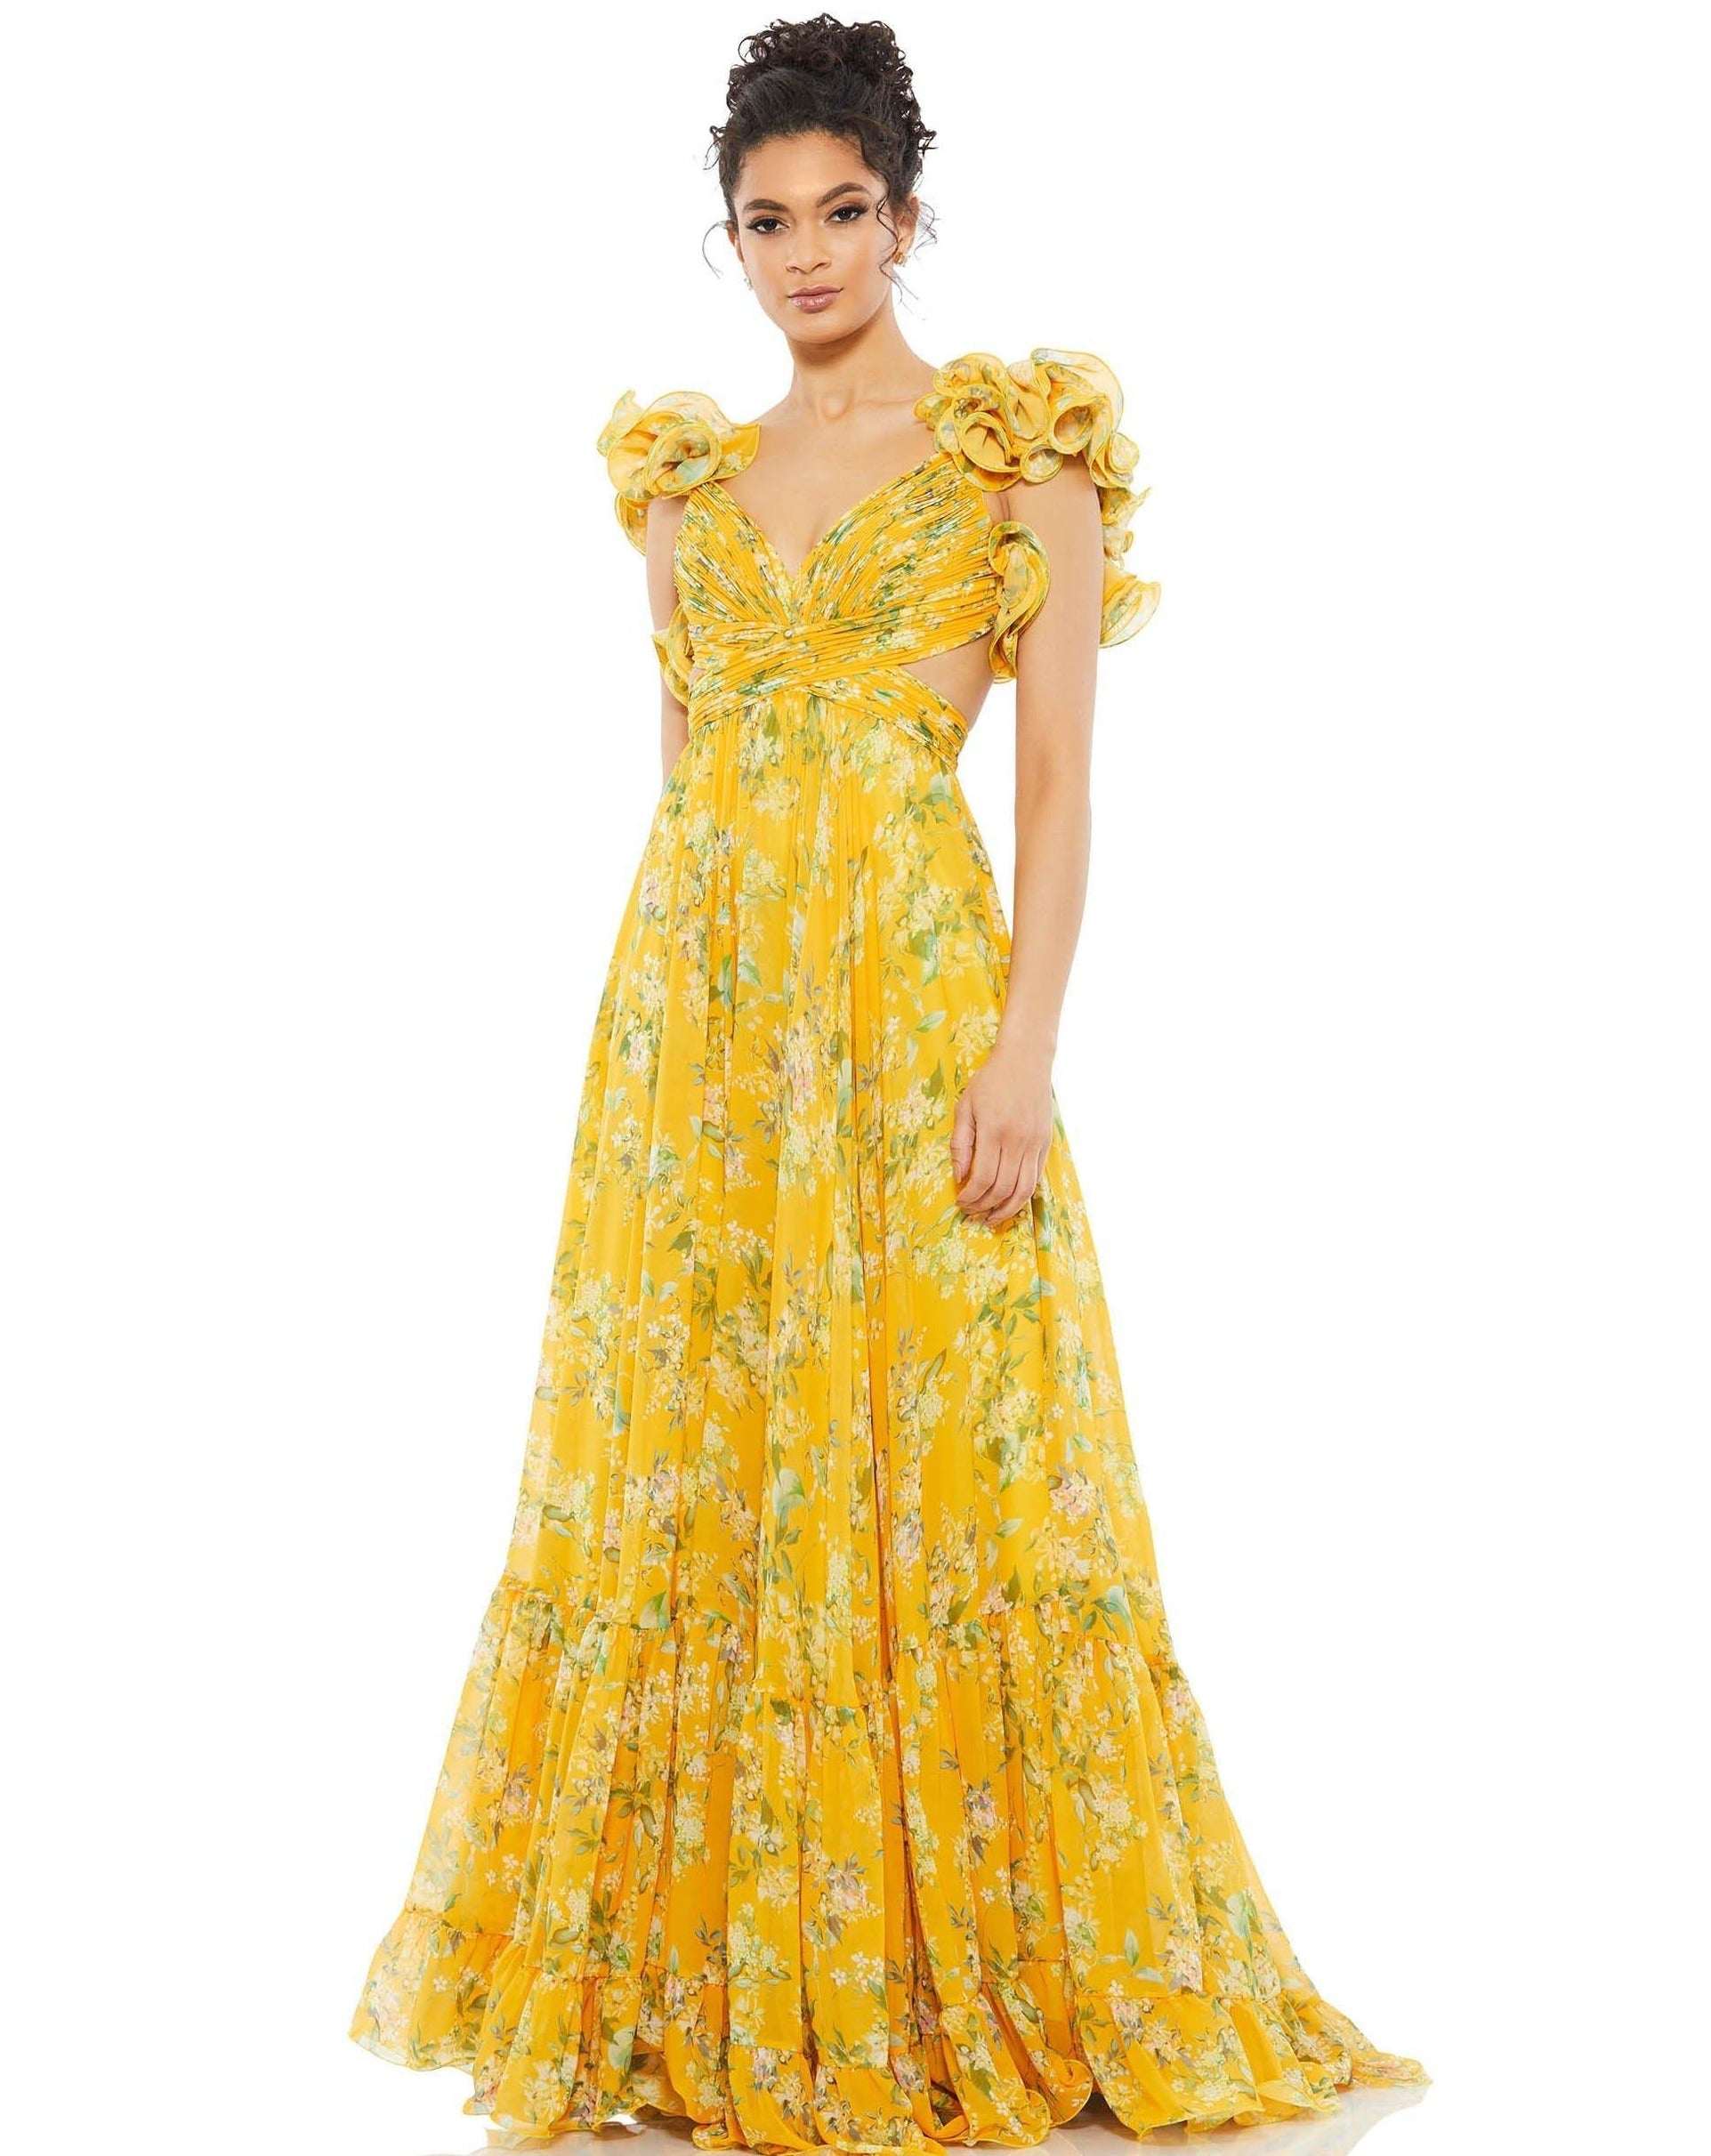 Mac Duggal Ruffled Floral Cut-Out Chiffon Gown 67803 - The Dress Outlet